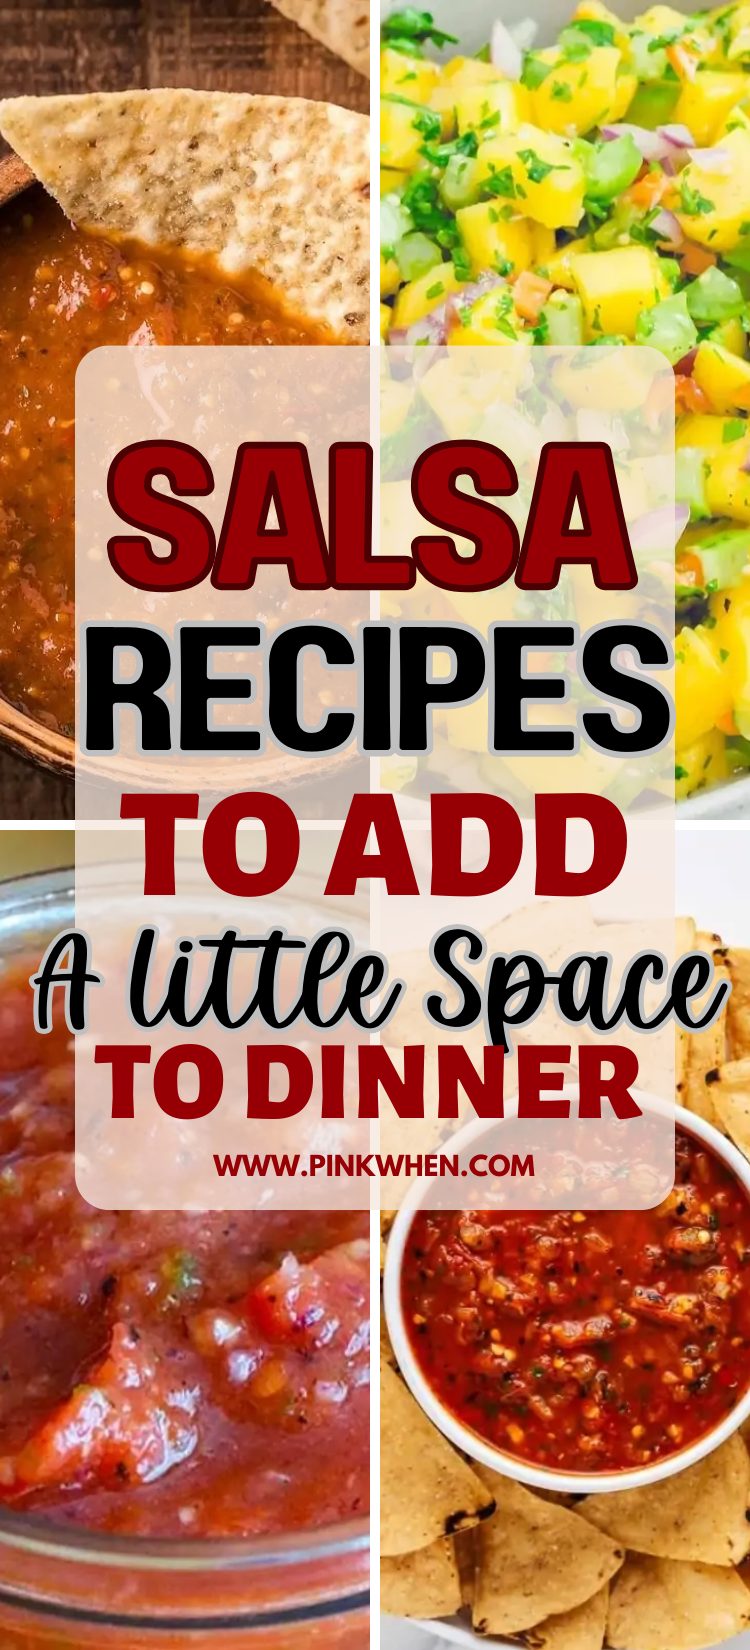 Salsa Recipes to Add a Little Spice to Dinner